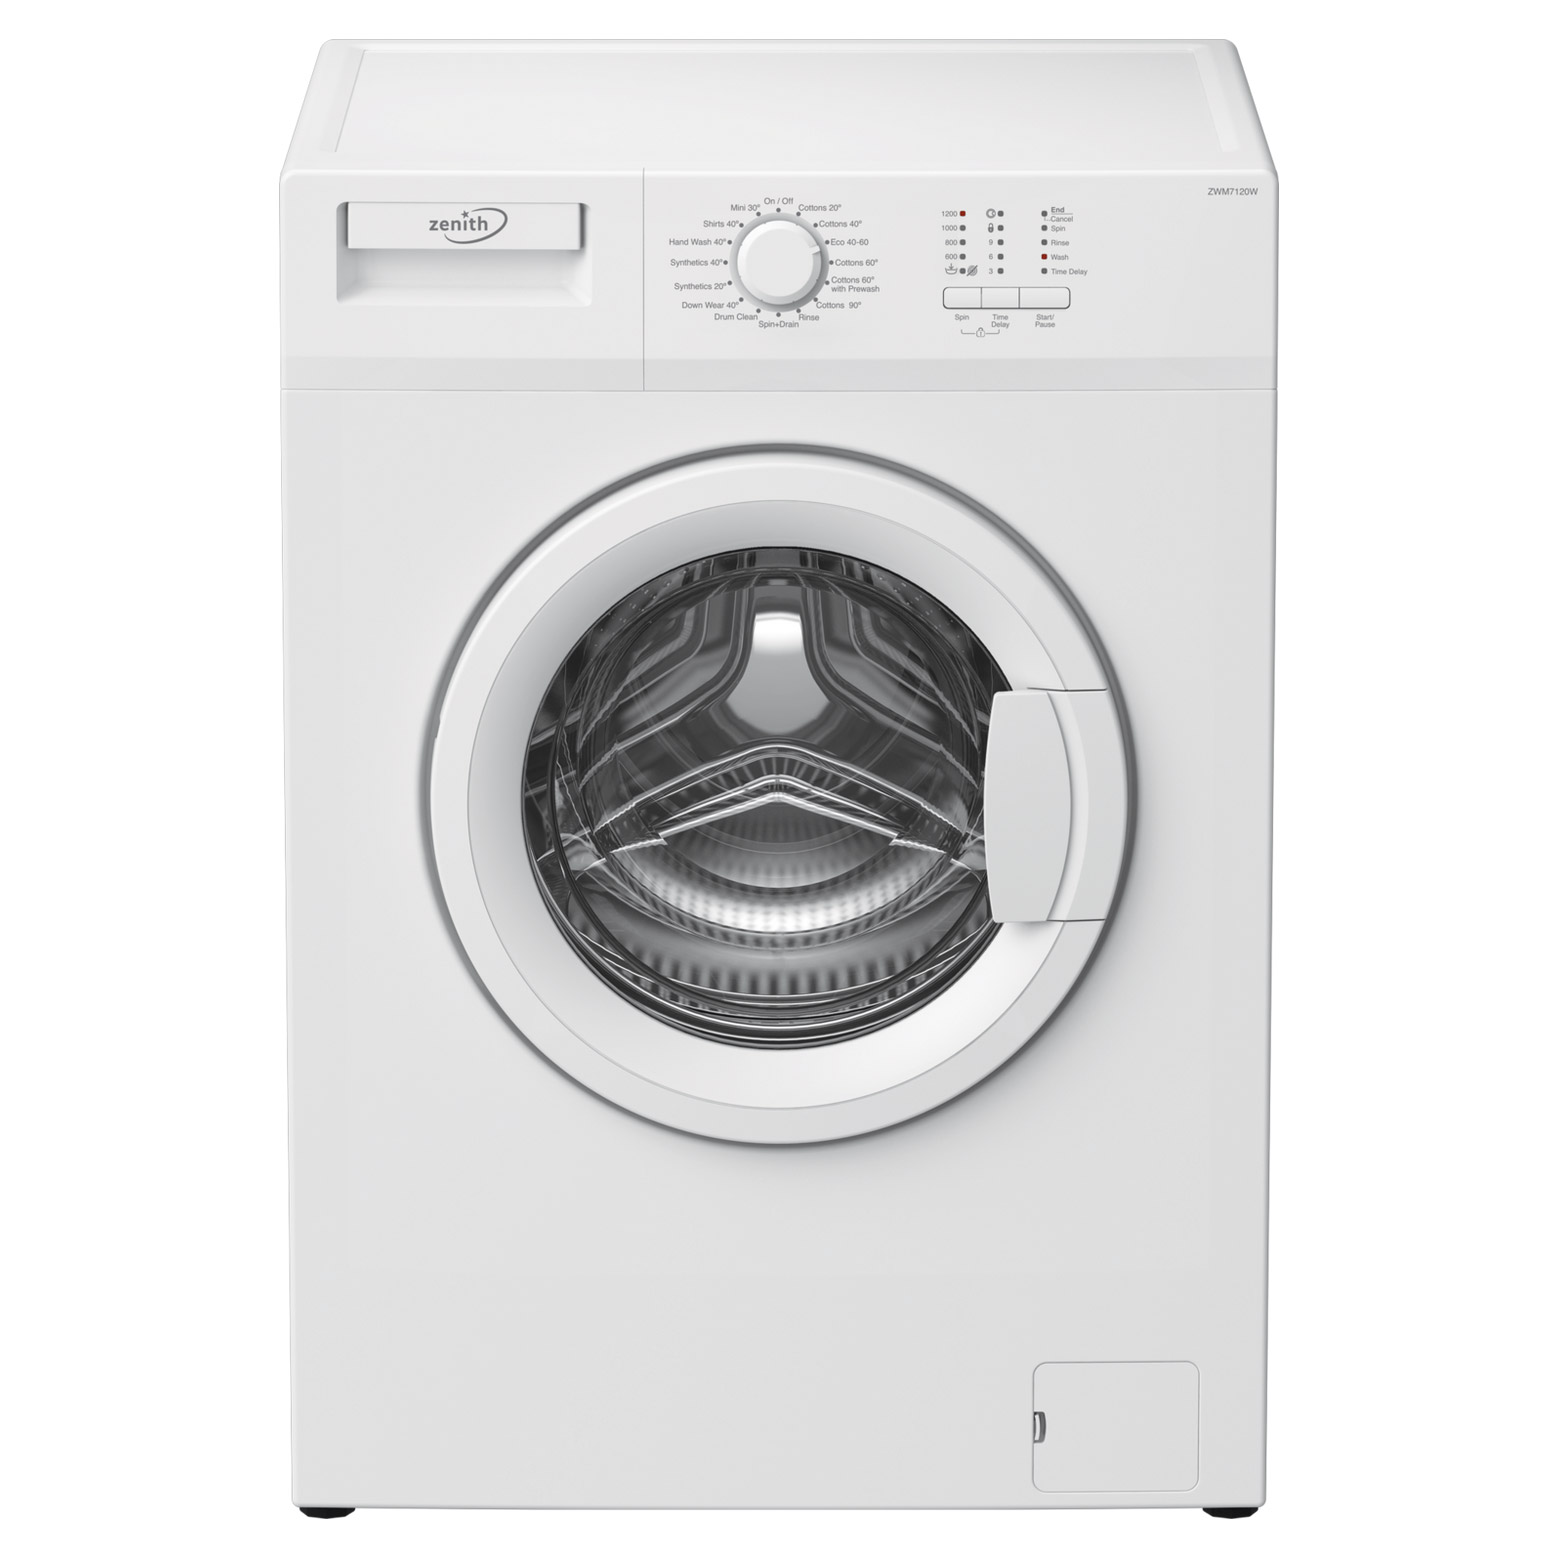 Image of Zenith ZWM7120W Washing Machine in White 1200rpm 7Kg D Rated